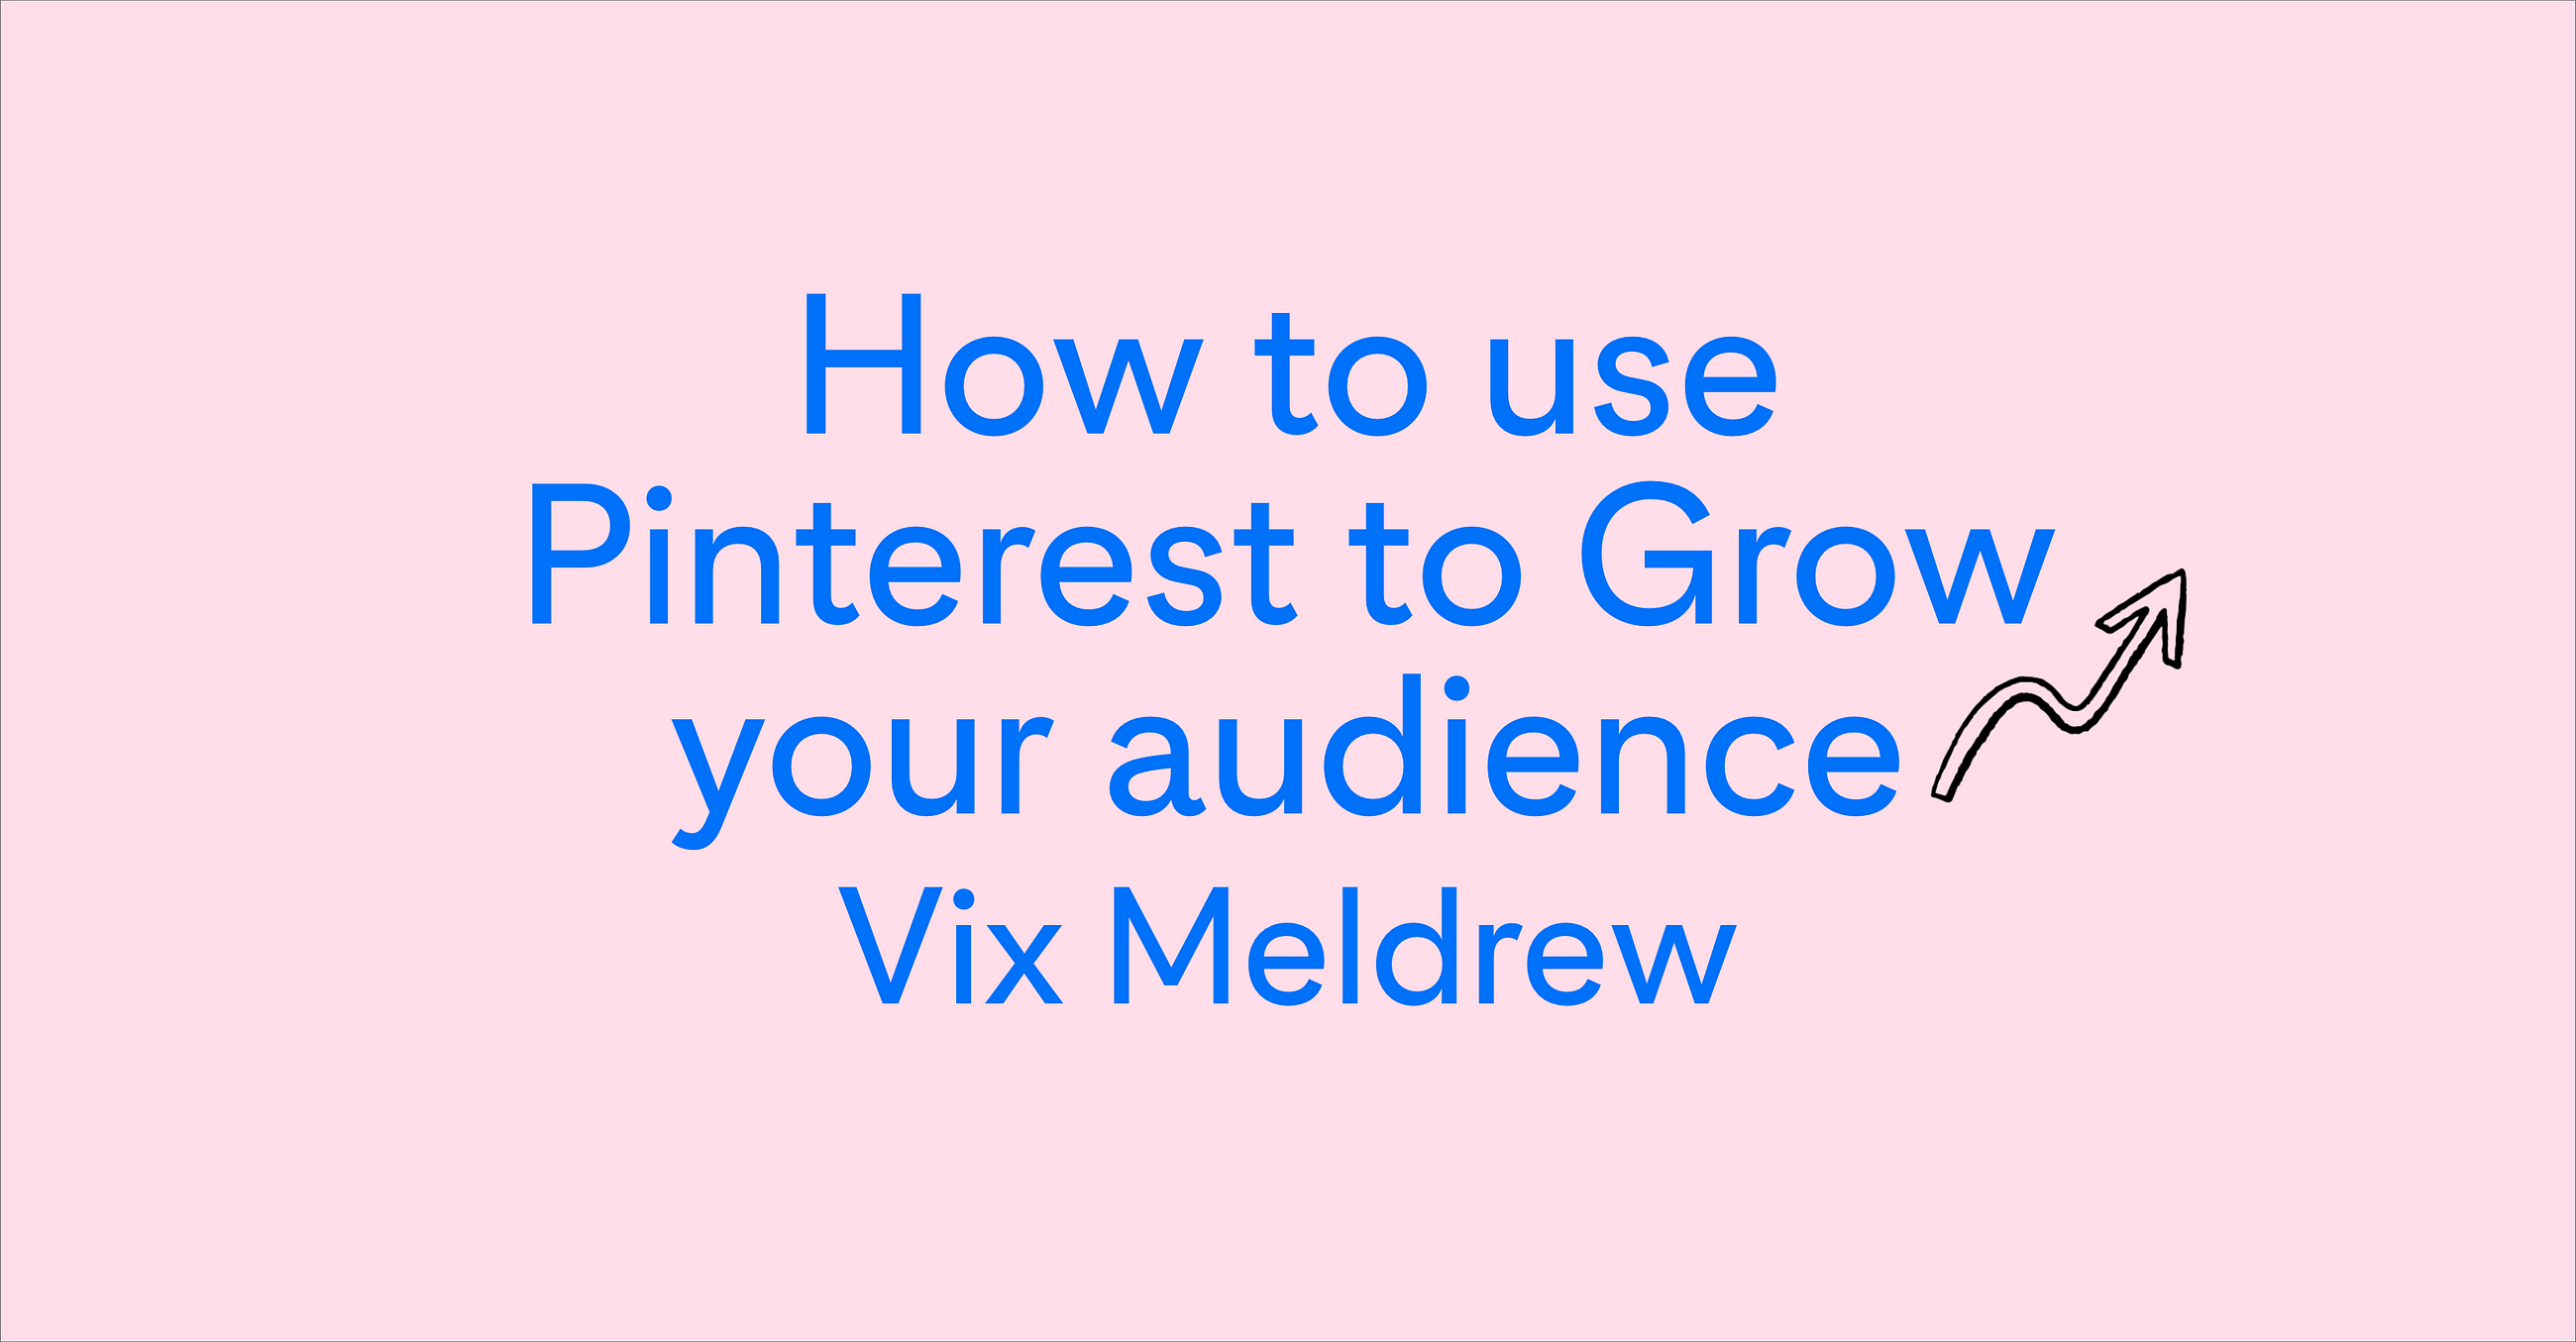 How to use Pinterest to Grow your audience with Vix Meldrew